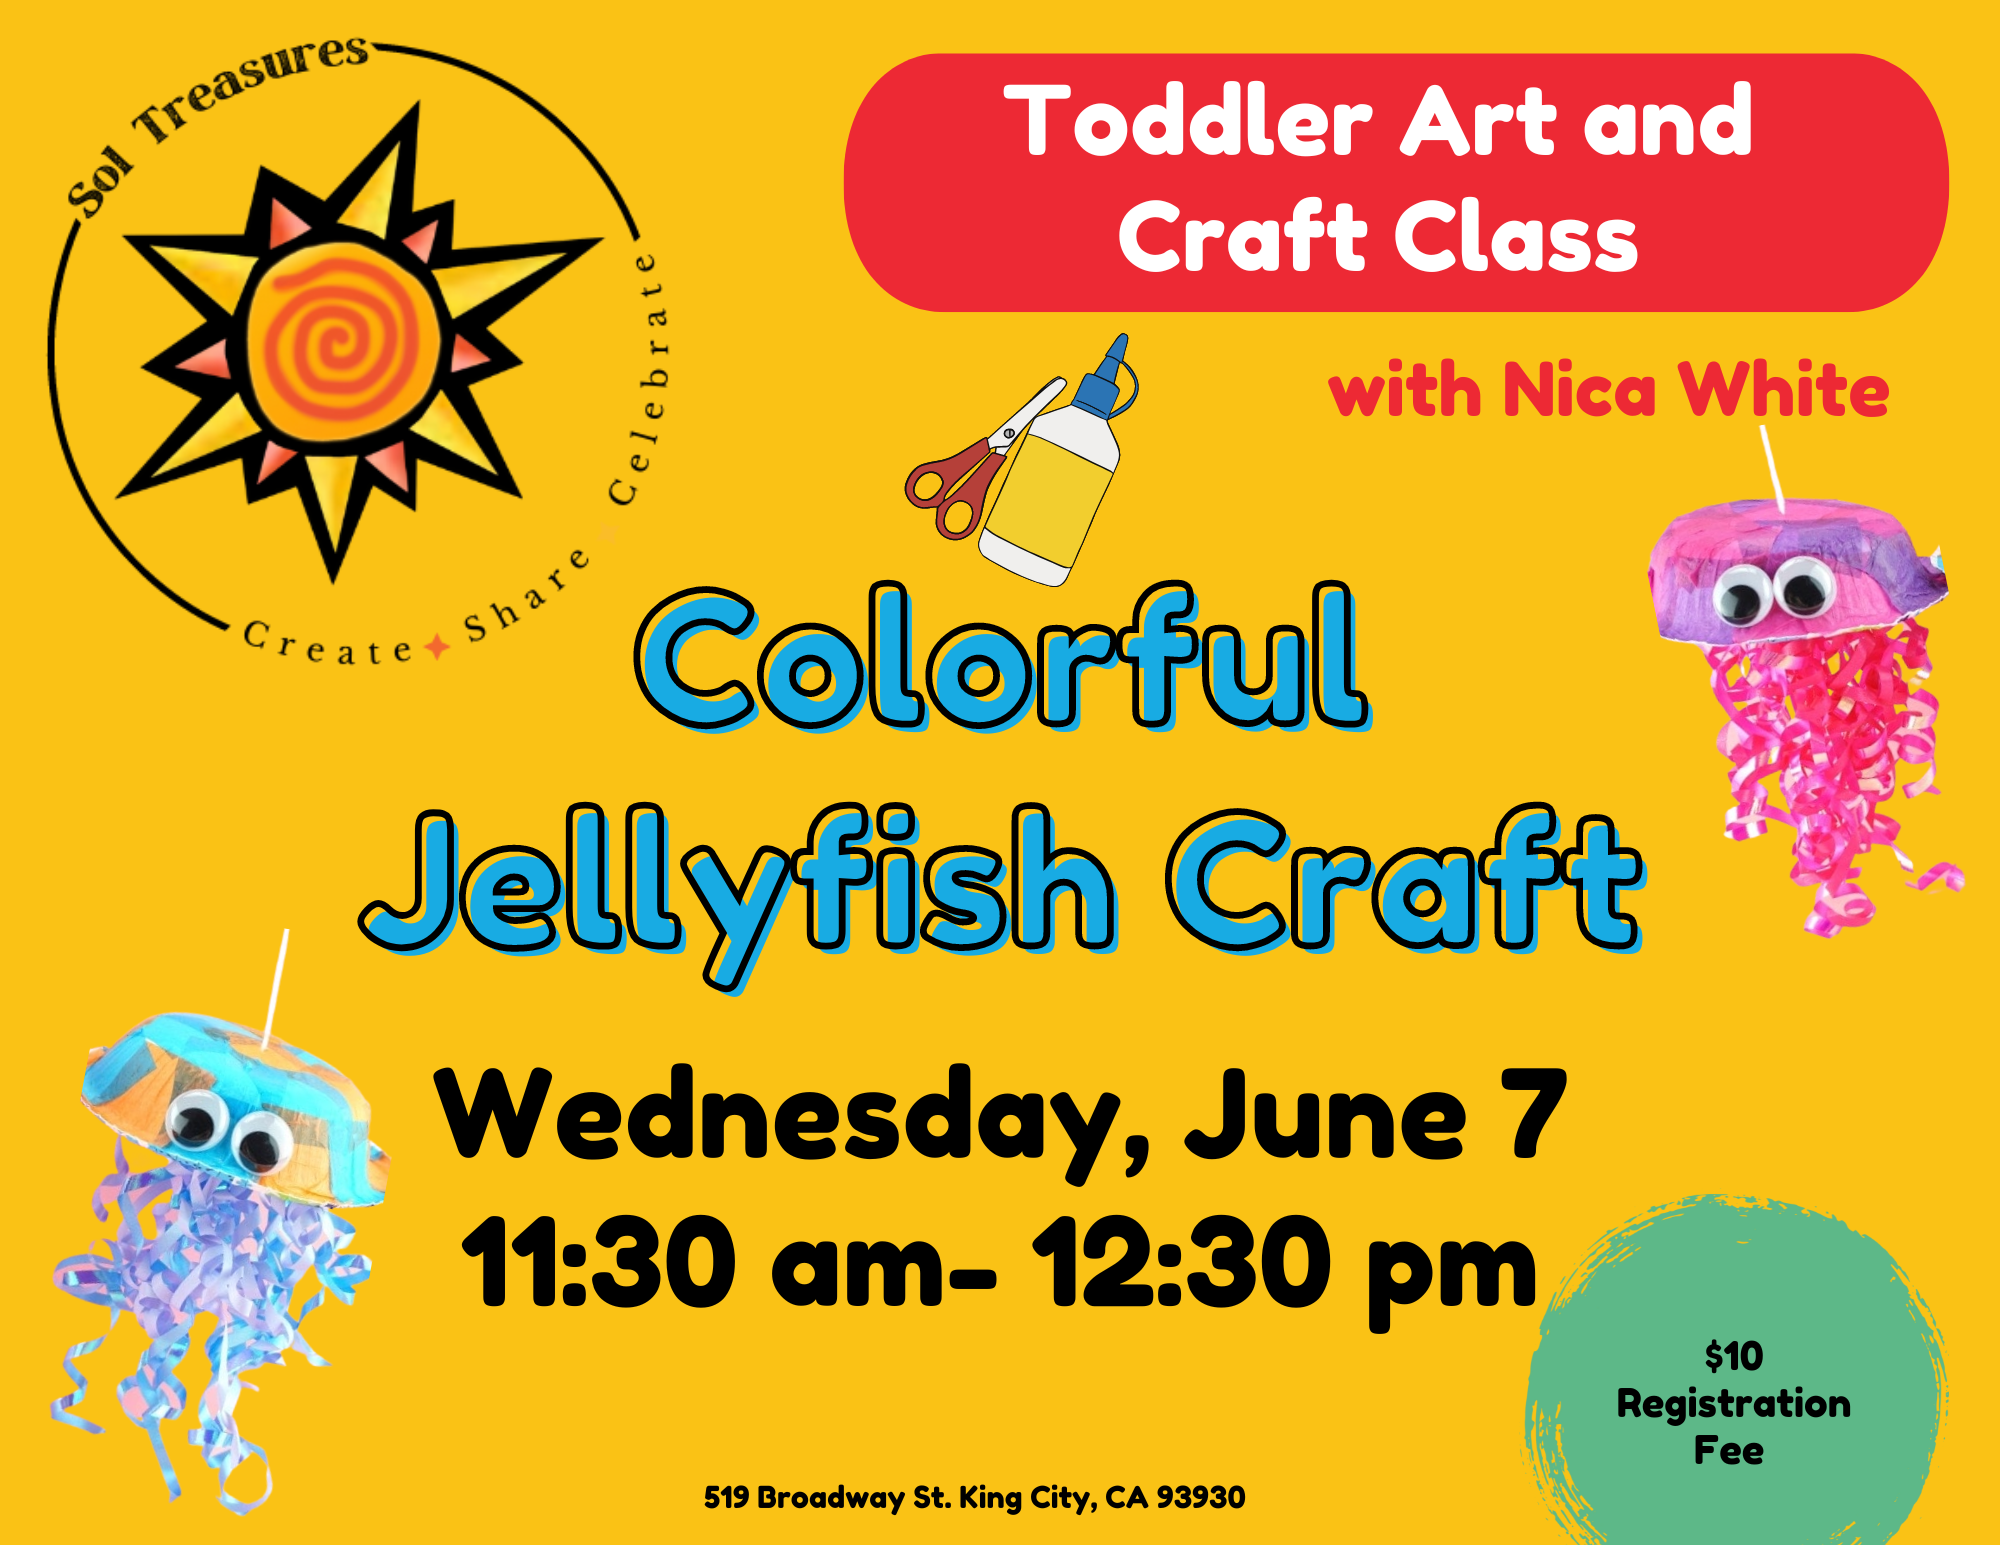 Toddler Jellyfish Craft flyer. Wednesday, June 7 from 11:30am - 12:30pm